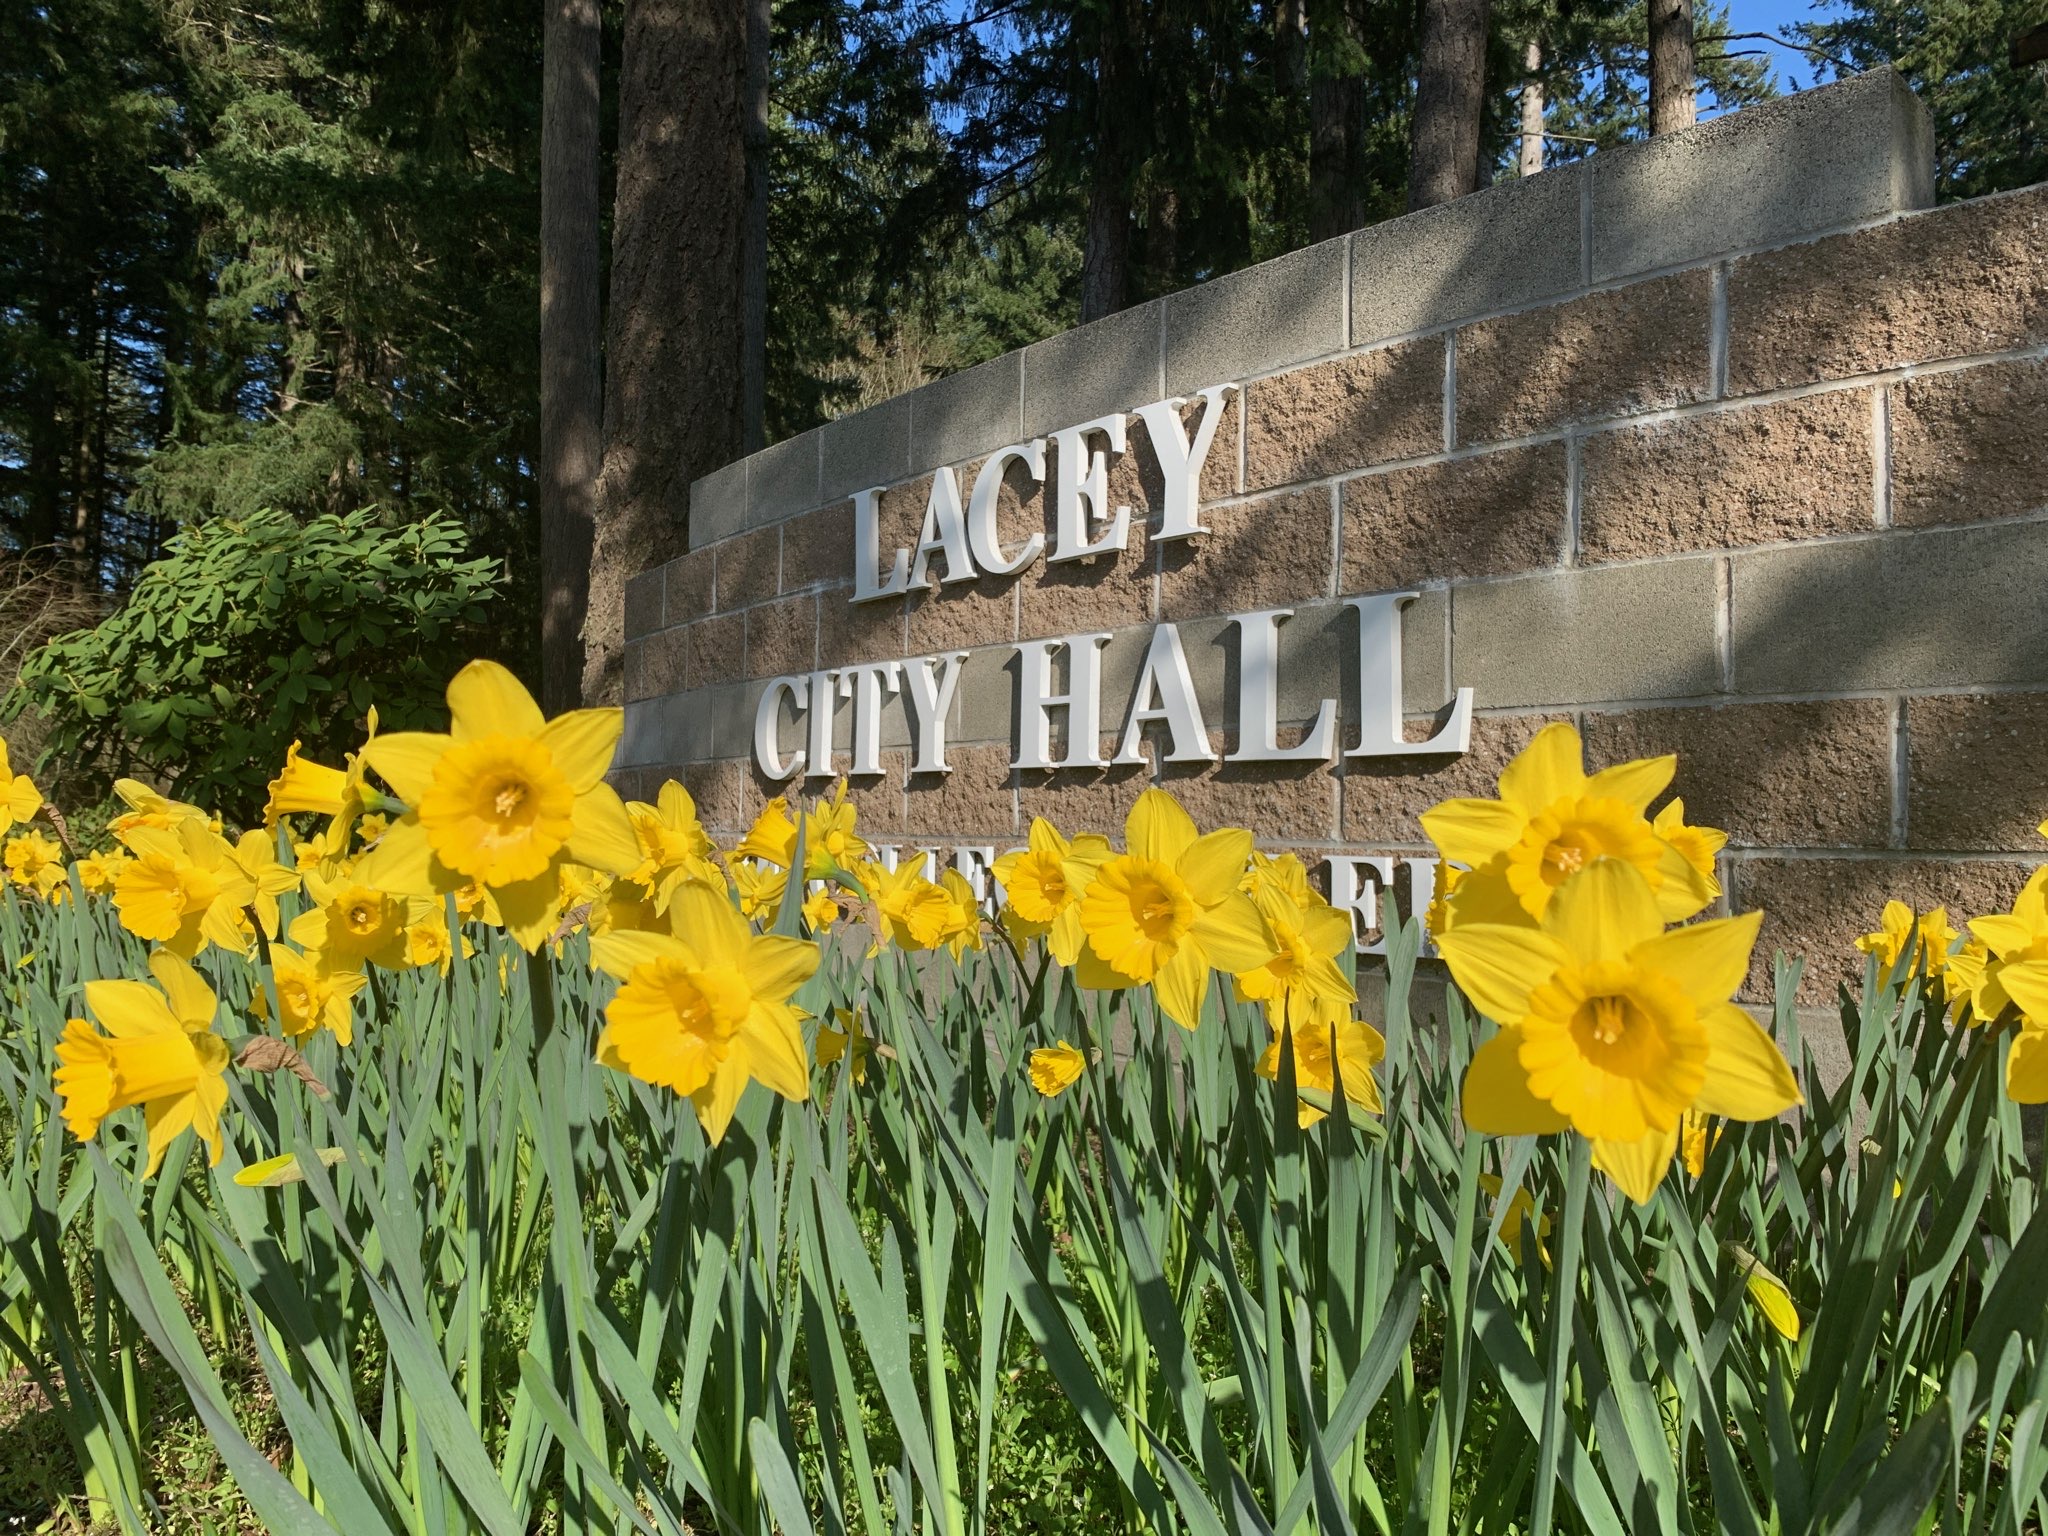 Lacey City Hall